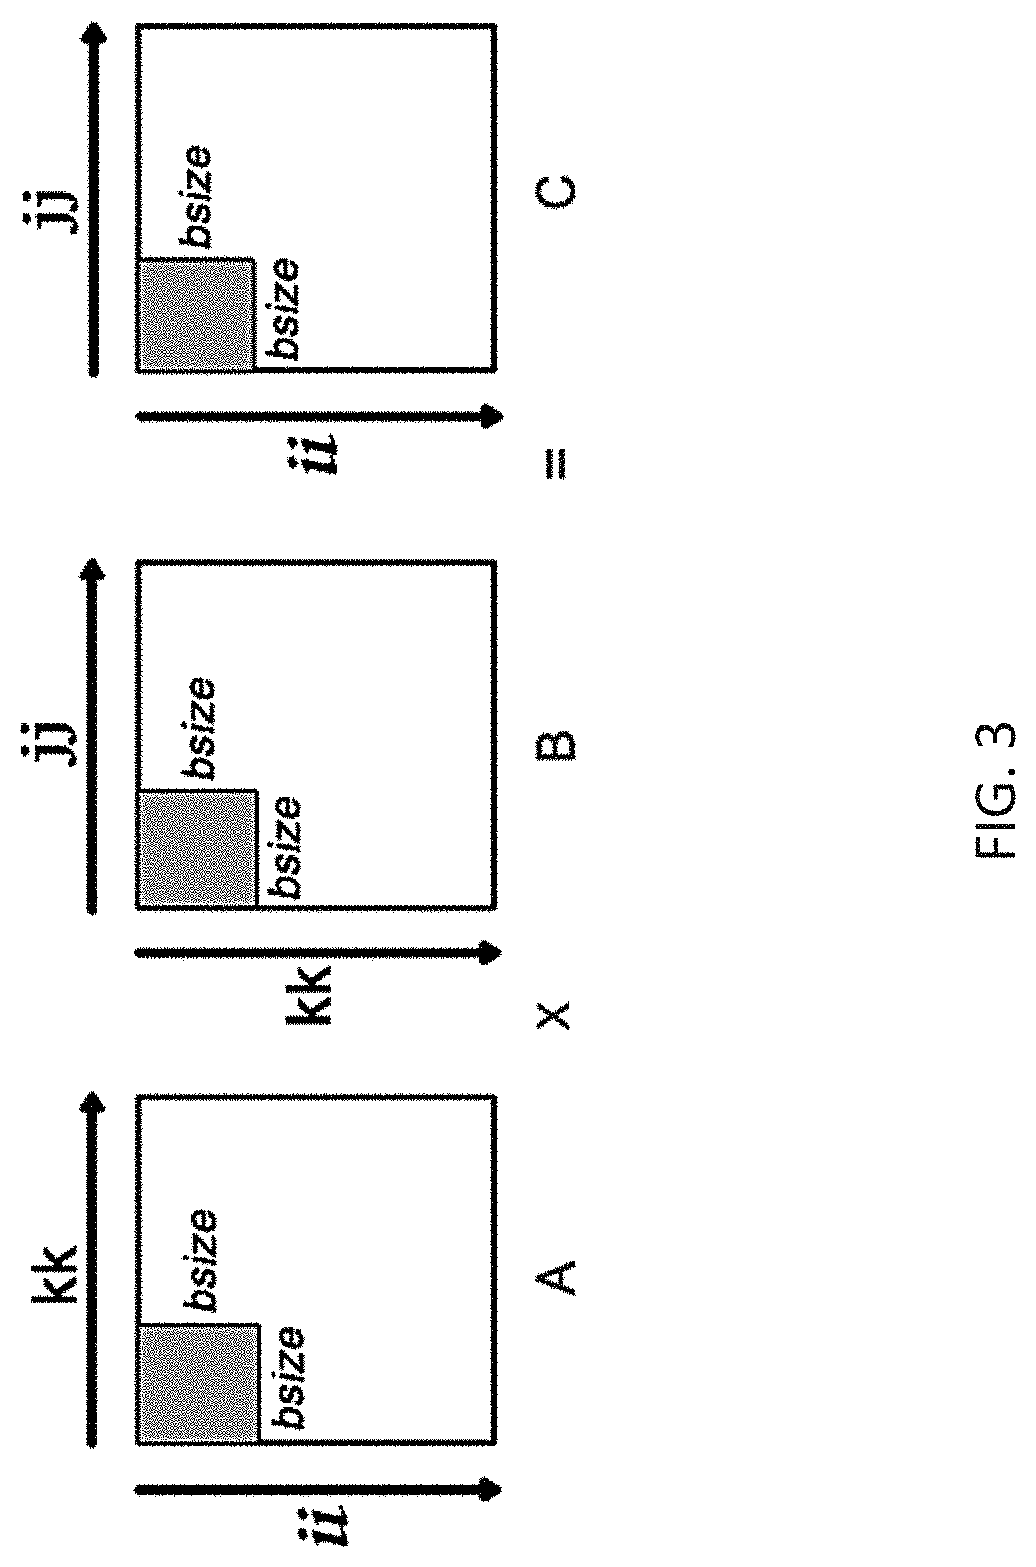 Methods of crash recovery for data stored in non-volatile main memory